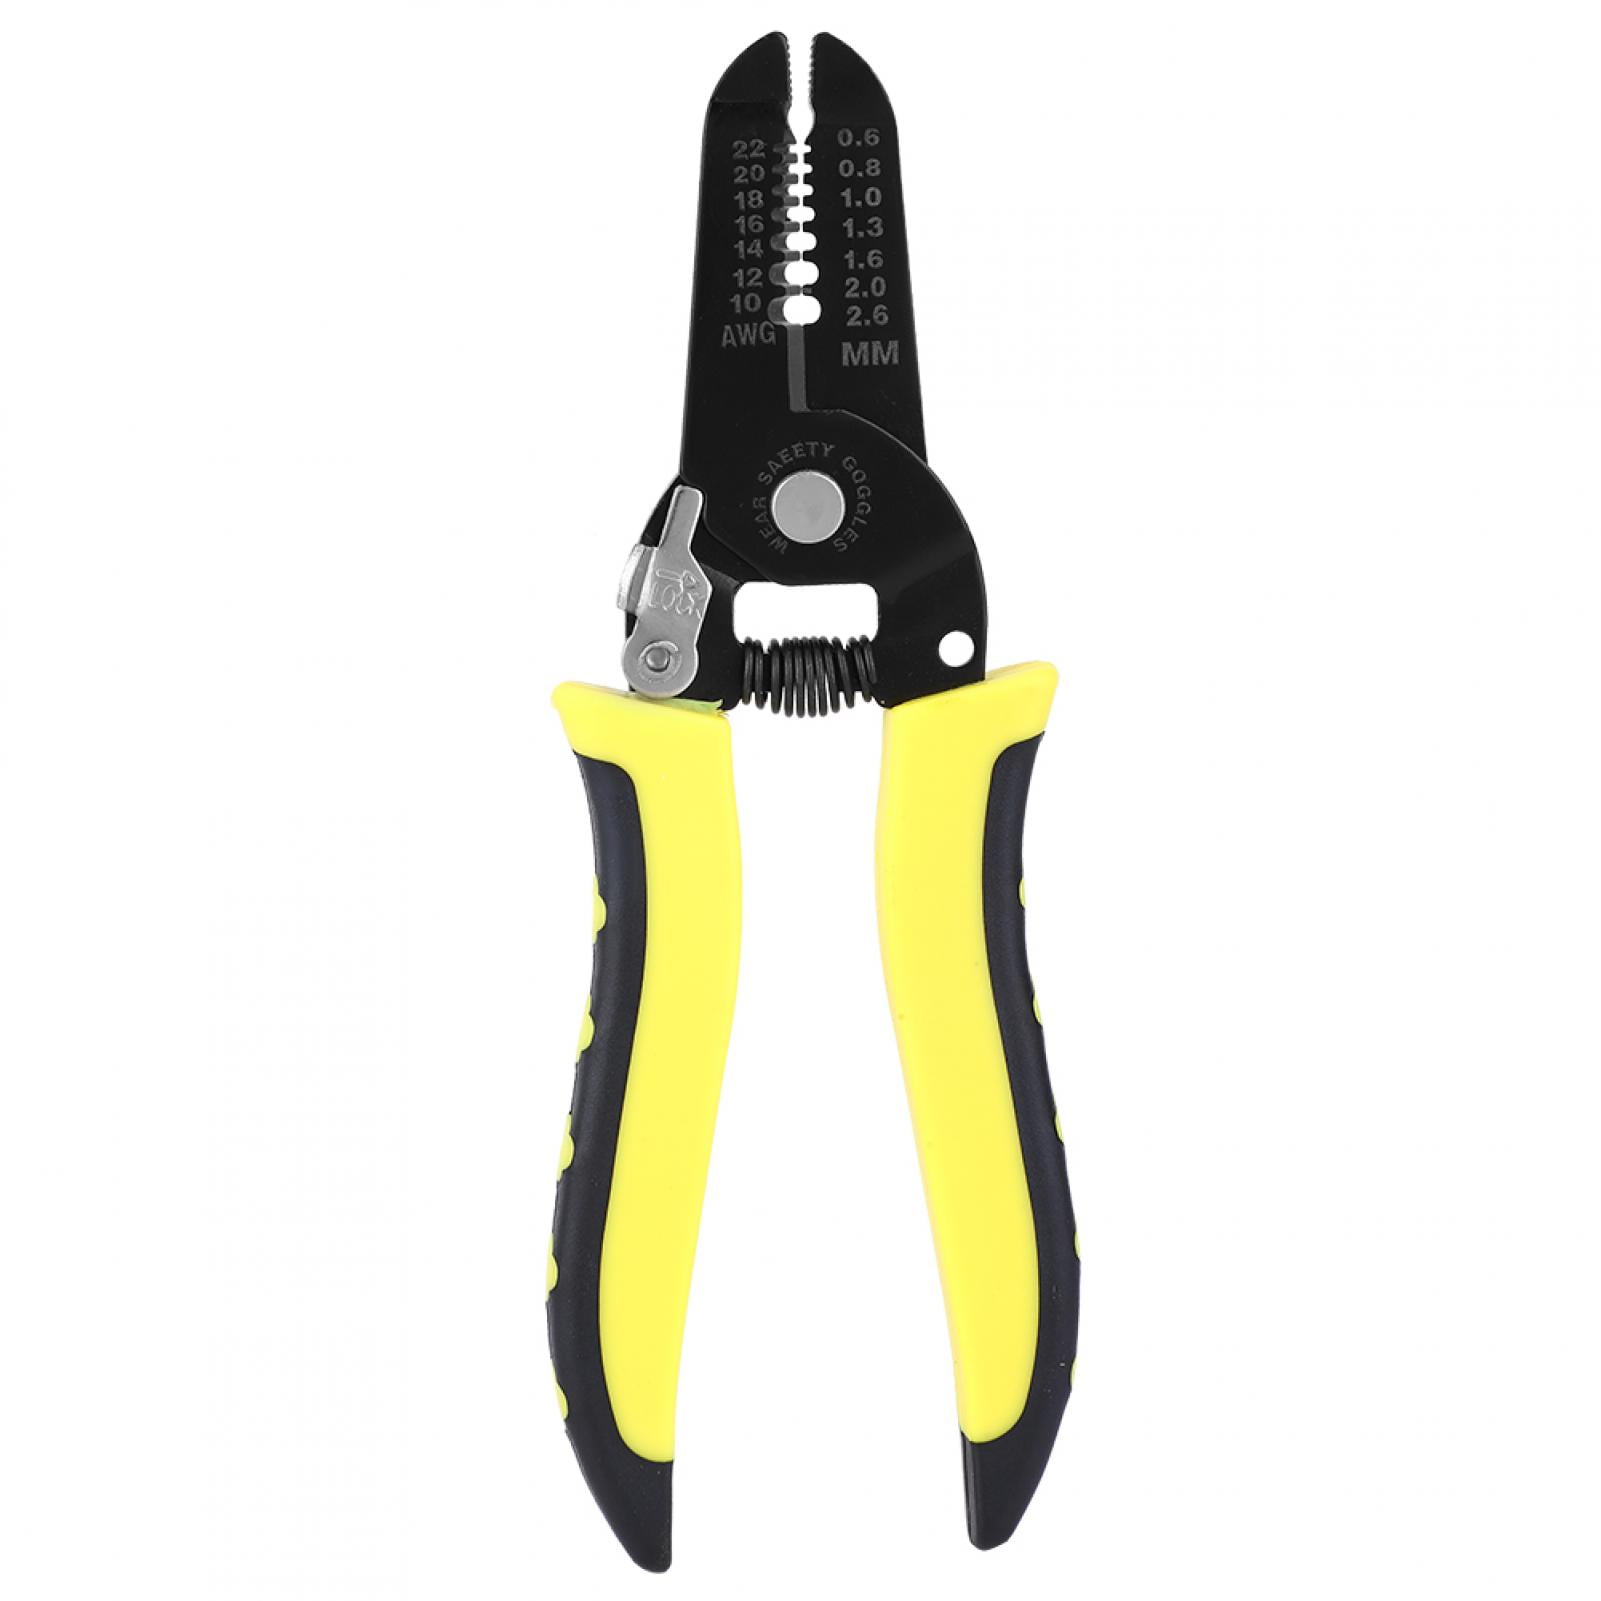 Adjustable, 0.6-2.6MM Multifunctional Cable Wire Strippers Pliers Cutter Steel 